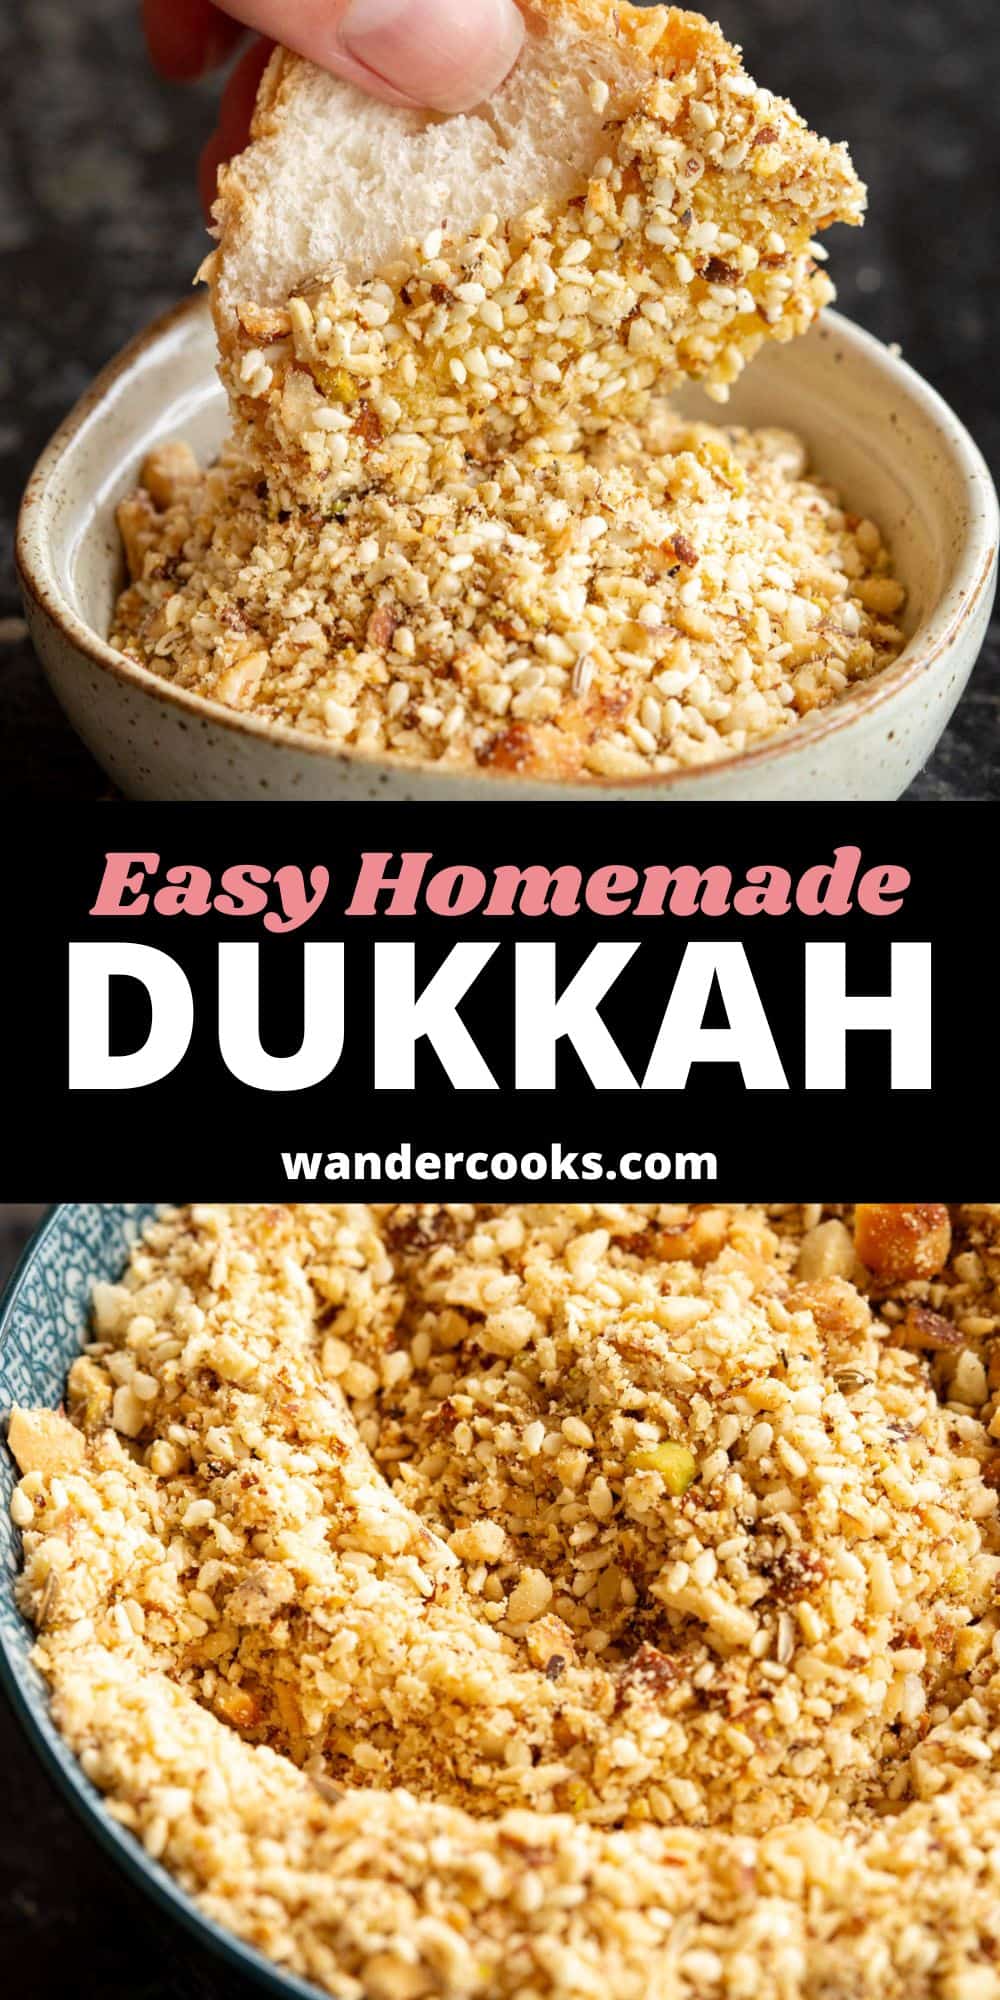 Quick 2 Minute Dukkah - Egyptian Nut and Spice Blend